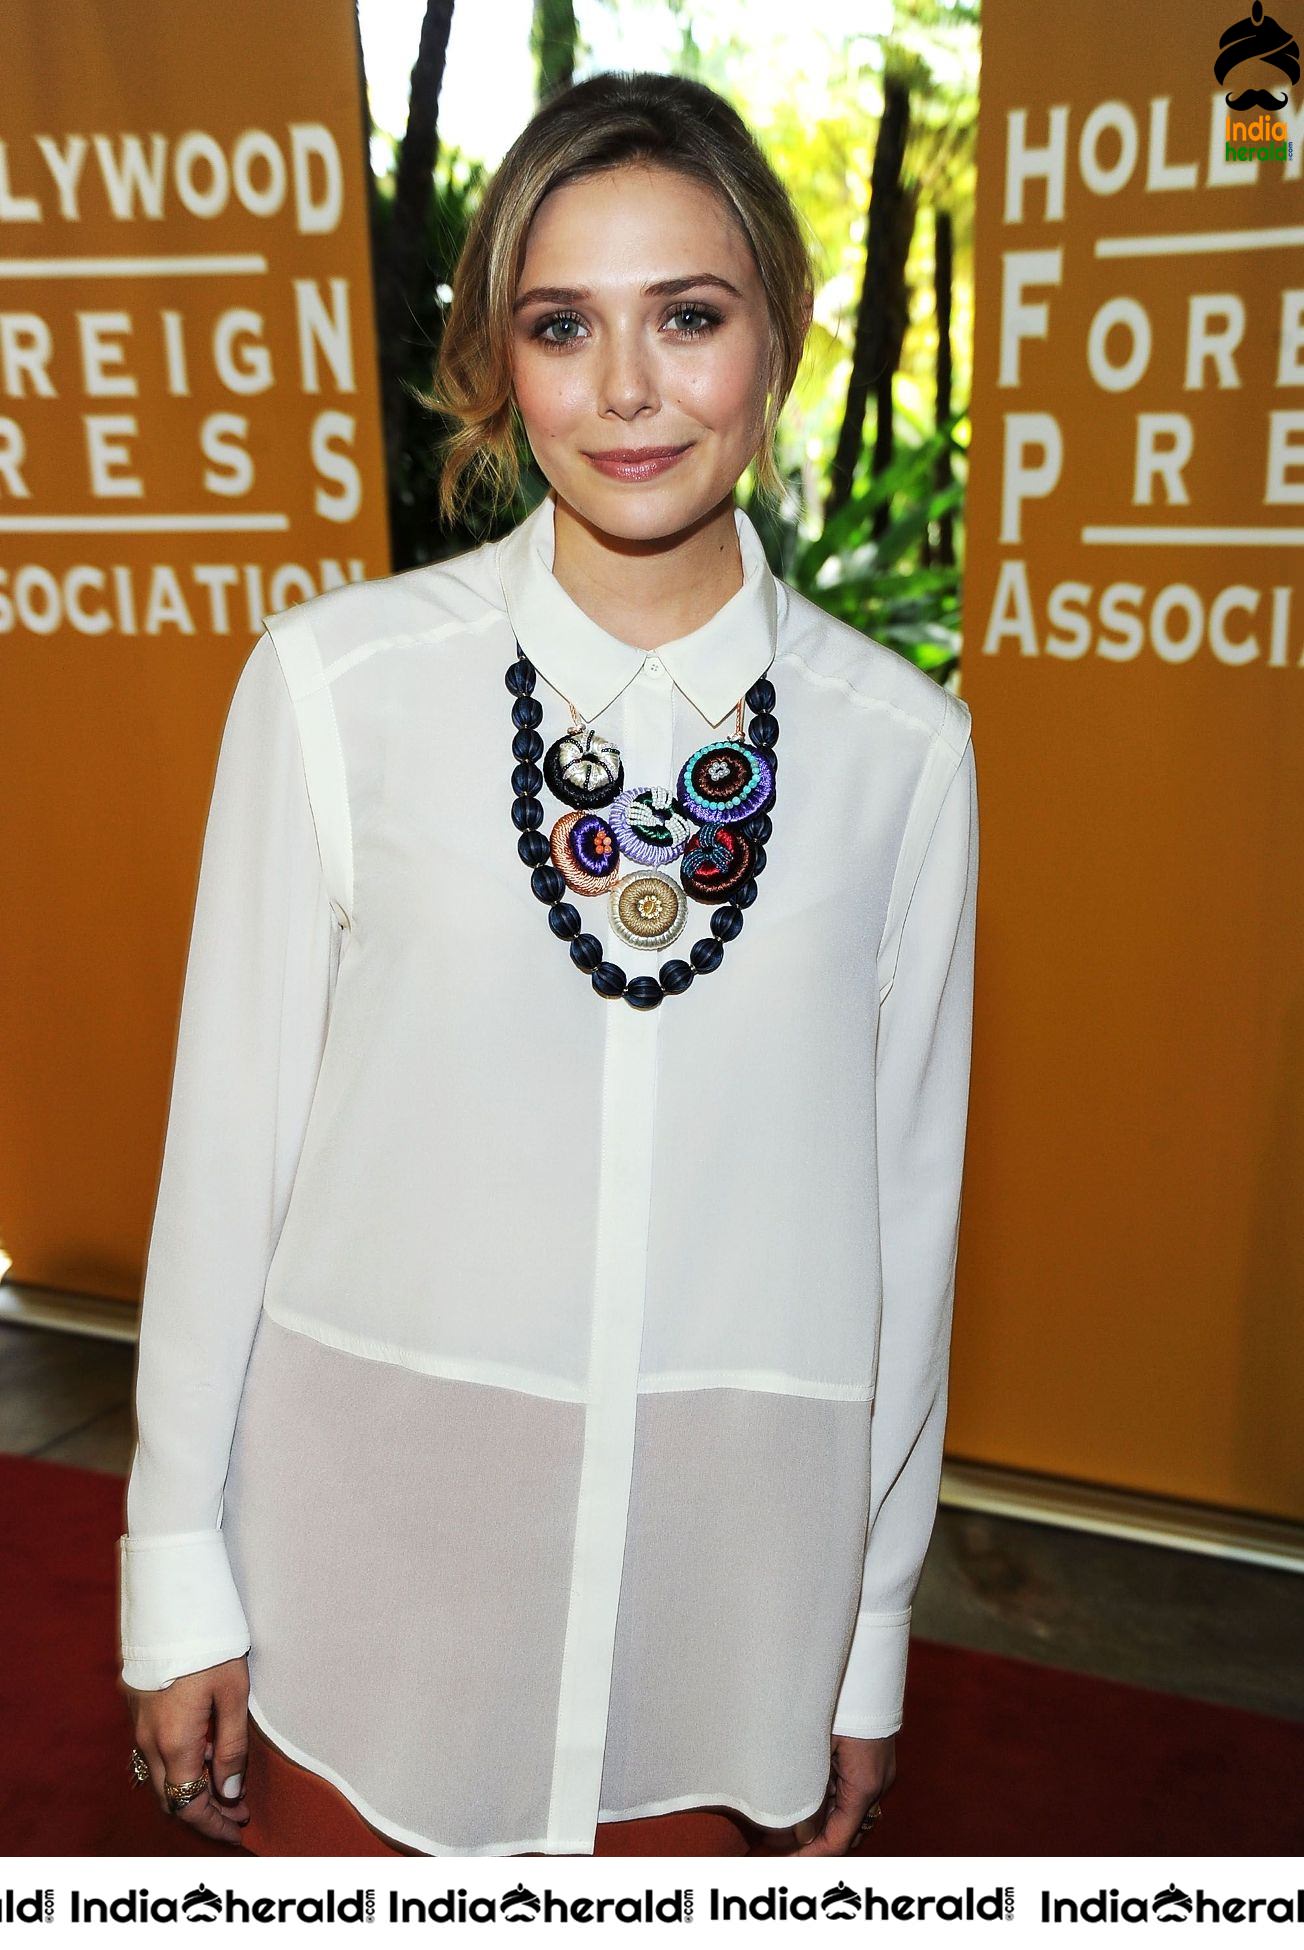 Elizabeth Olsen at The Hollywood Foreign Press Association Annual Luncheon